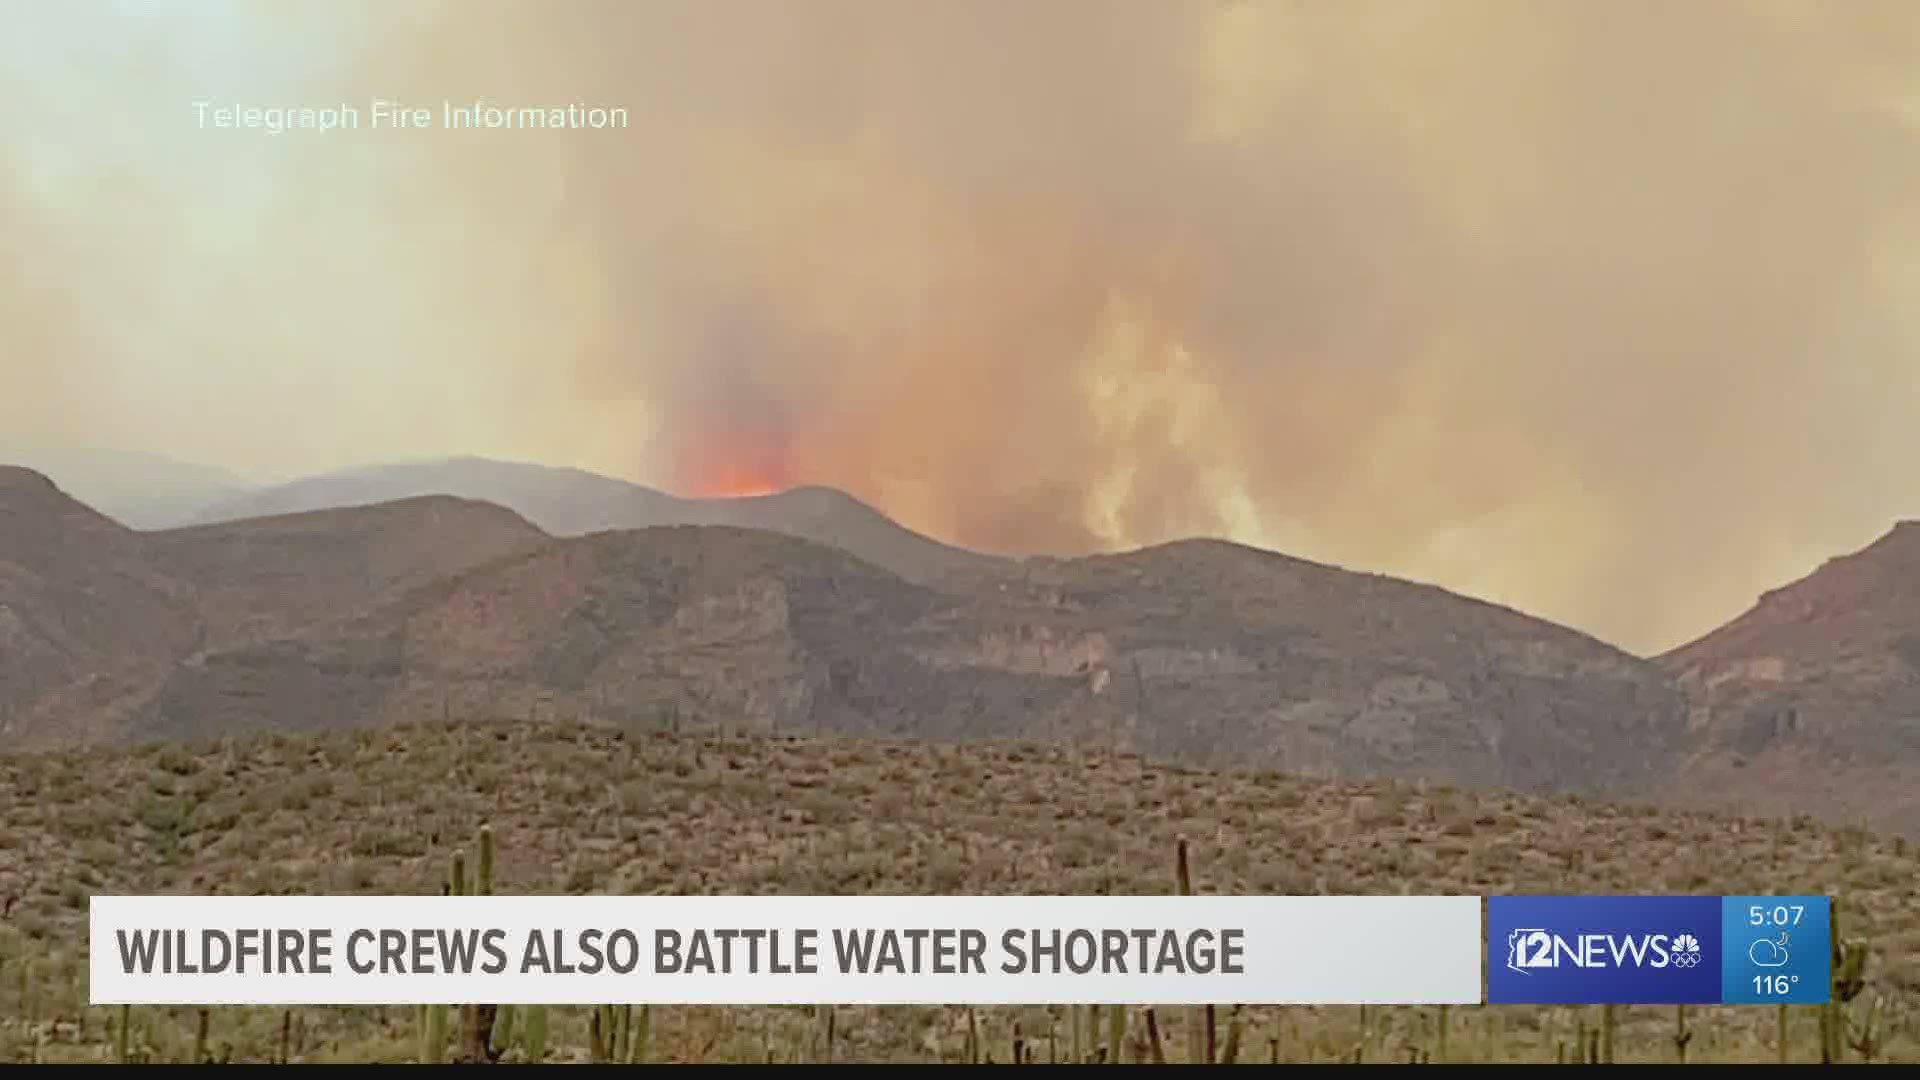 The drought is making it harder for firefighters who are taking on Arizona's wildfires. Dry vegetation is in front of the fires and water is difficult to find.